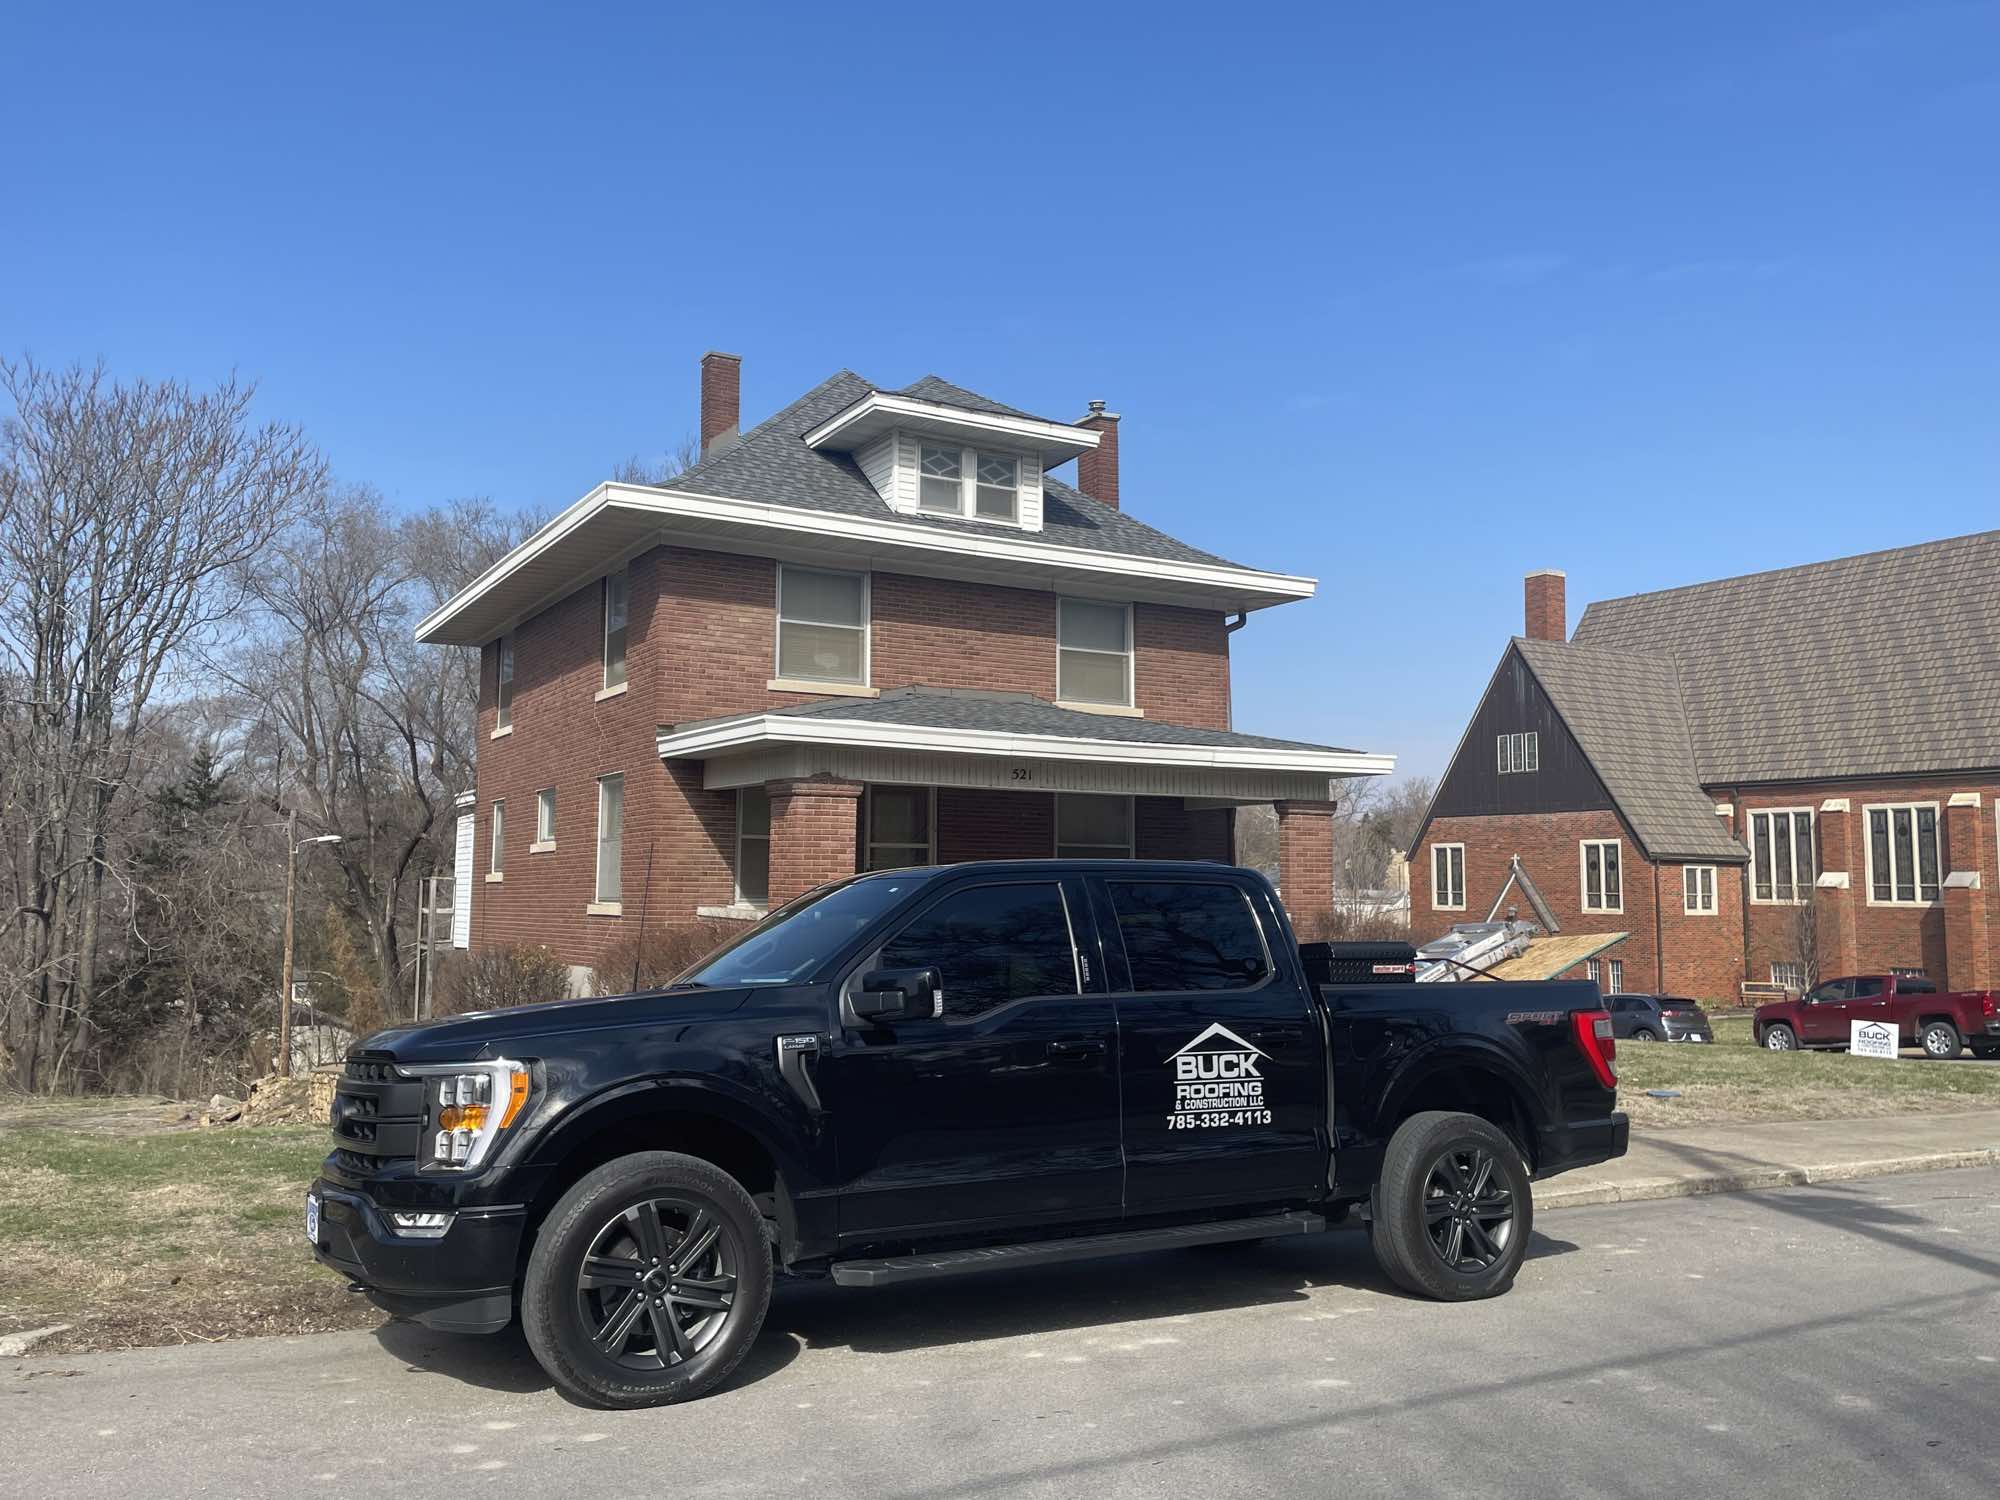 Buck Roofing installs CertainTeed Landmark Pewter colored shingles for homes in Kansas City